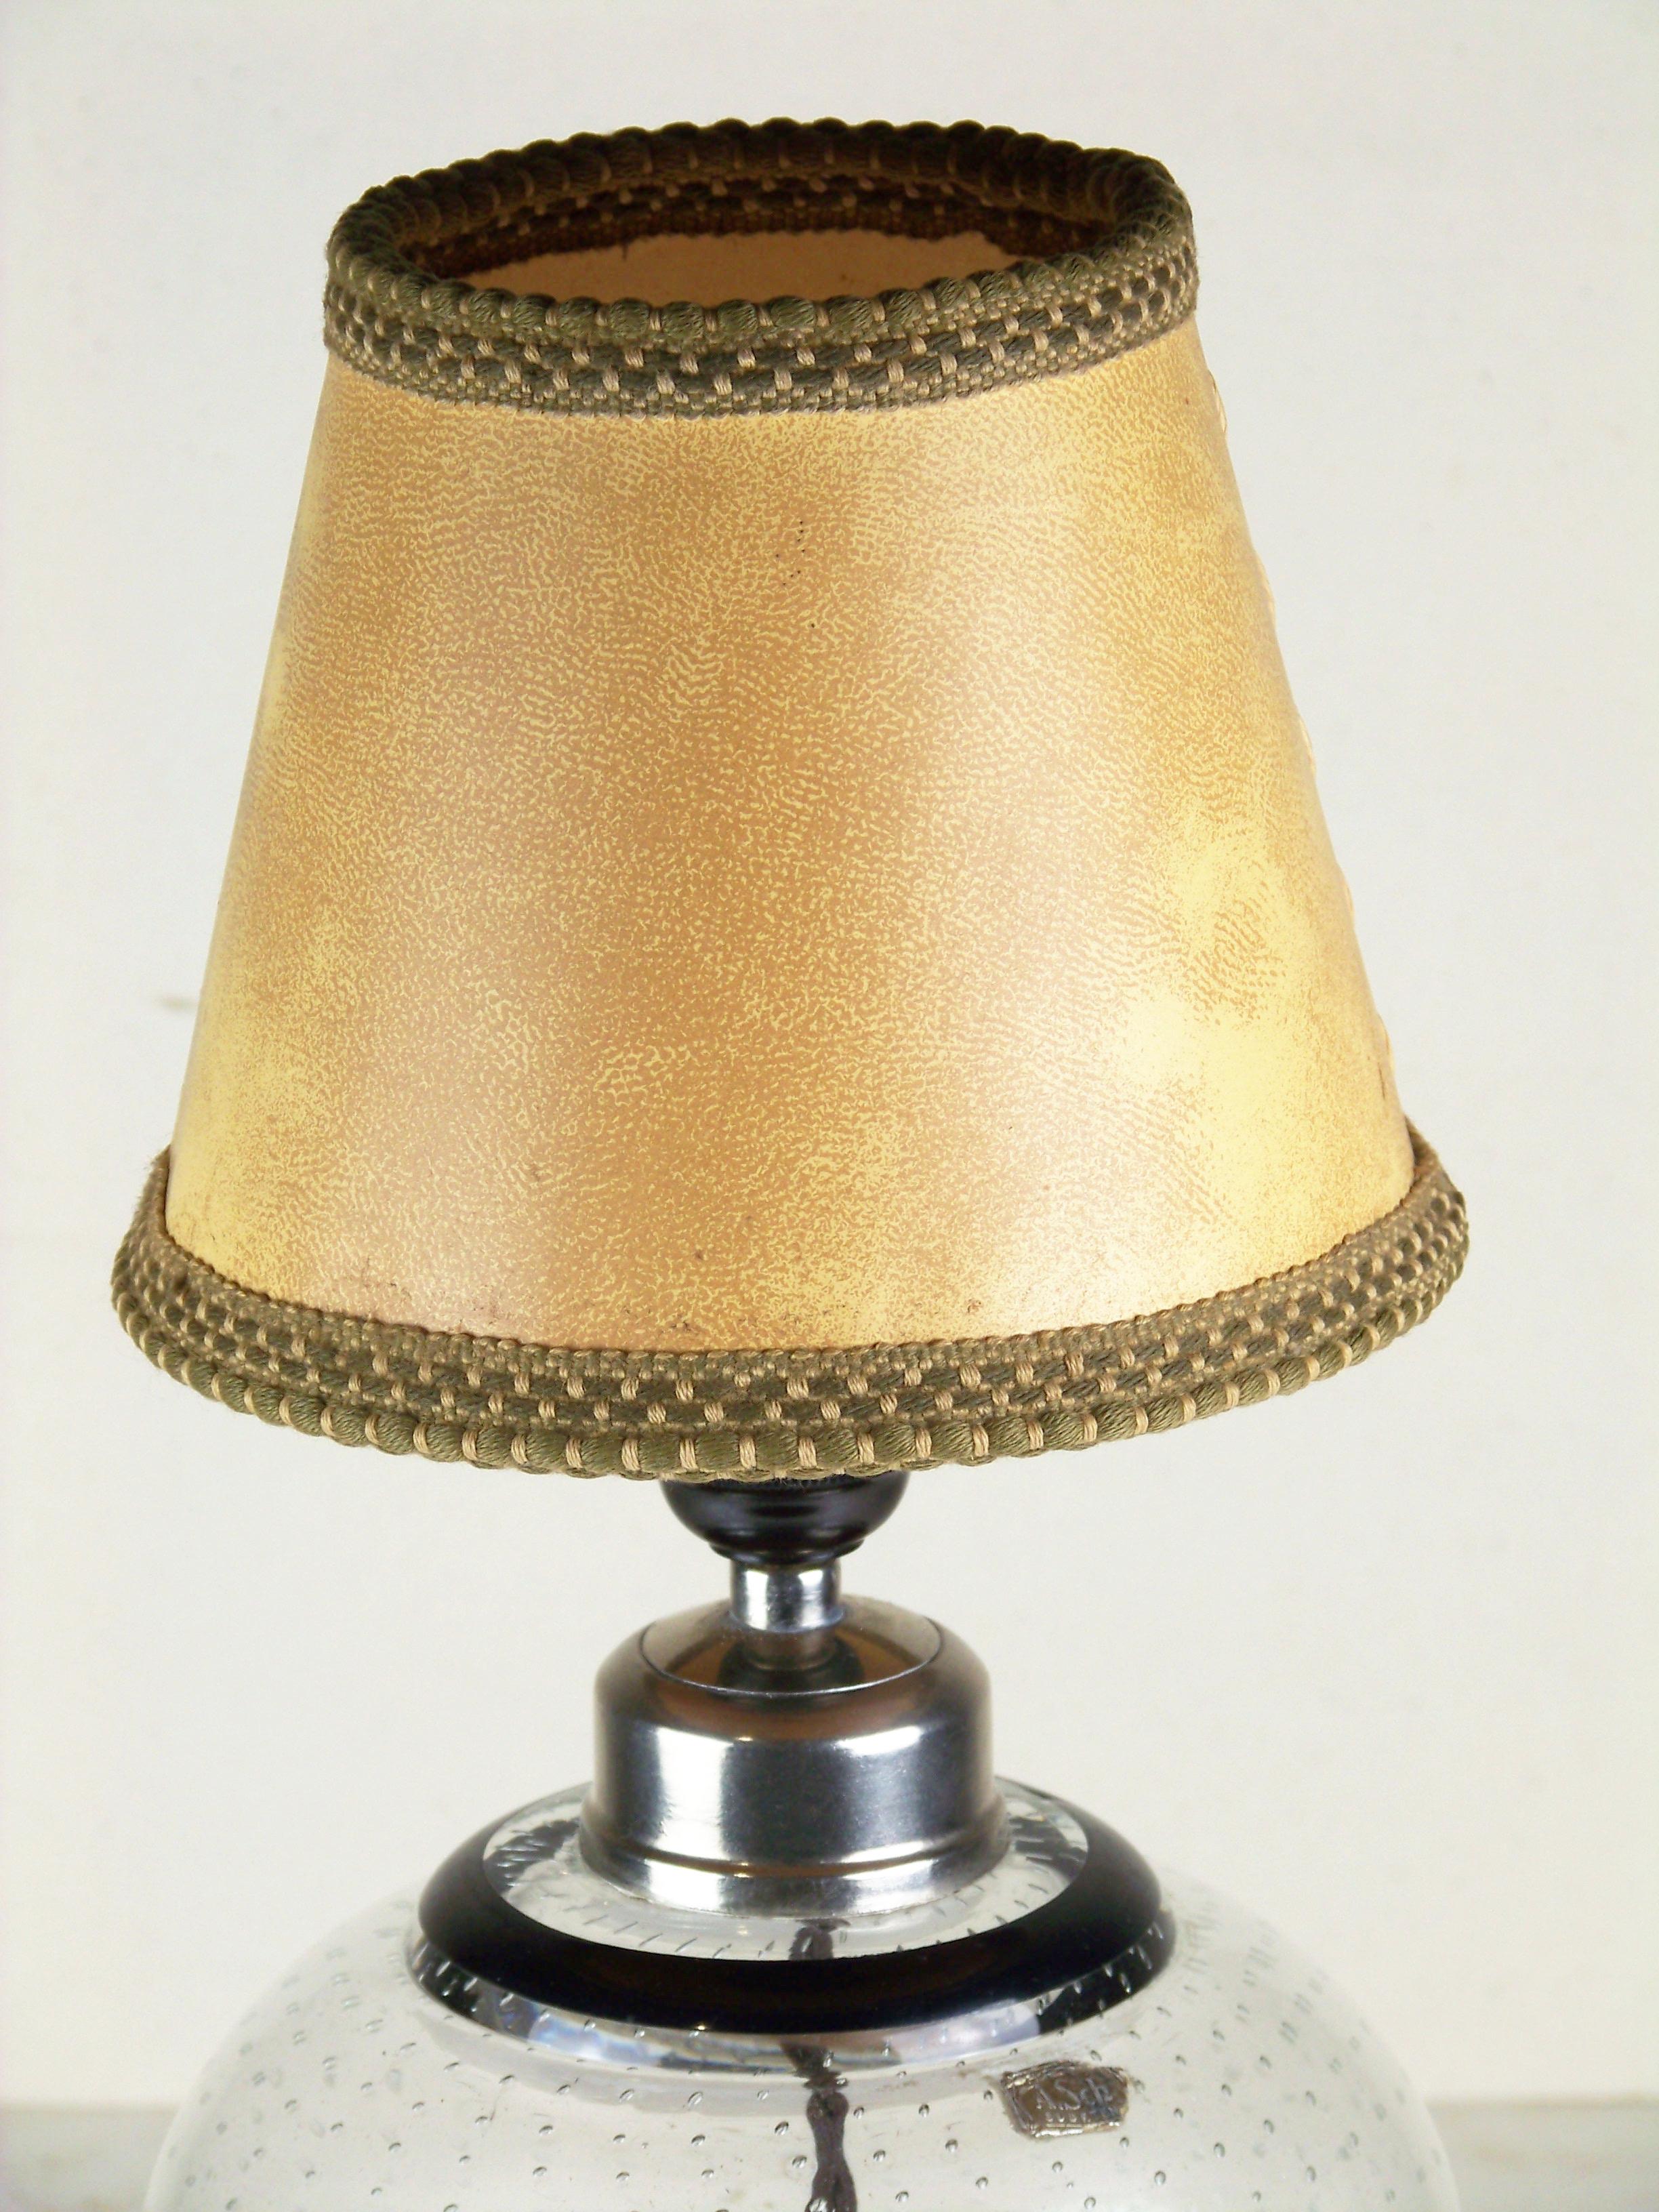 Table Glass Lamp - A.Sch. Sudetenland, 1938-1945 In Good Condition For Sale In Praha, CZ